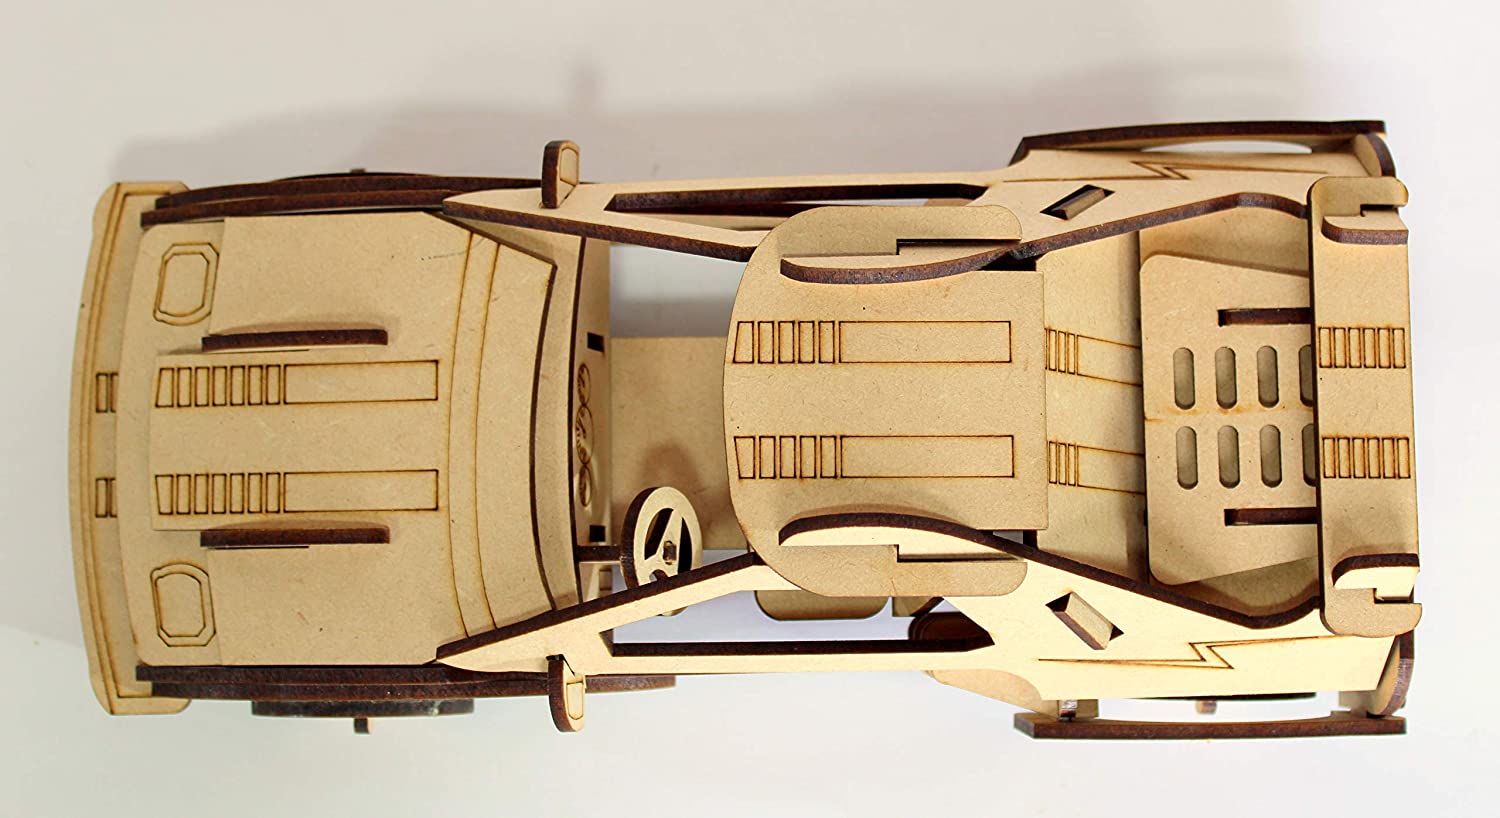 Wooden Construction Kit with Paint - Sports Car